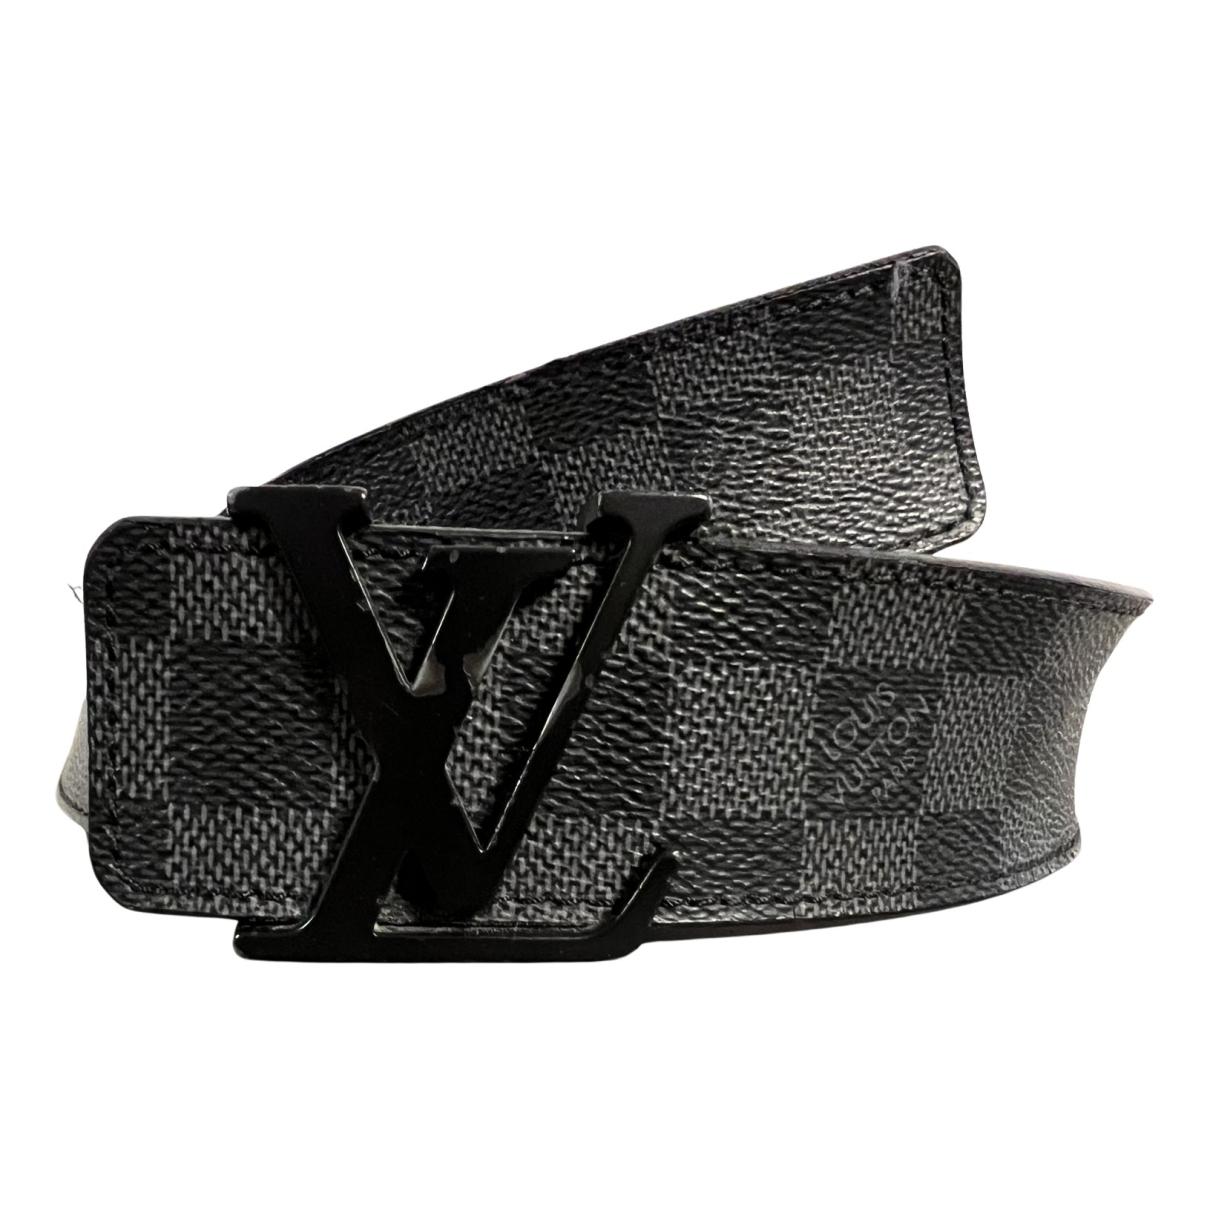 Initiales leather belt Louis Vuitton Grey size 95 cm in Leather - 29544487